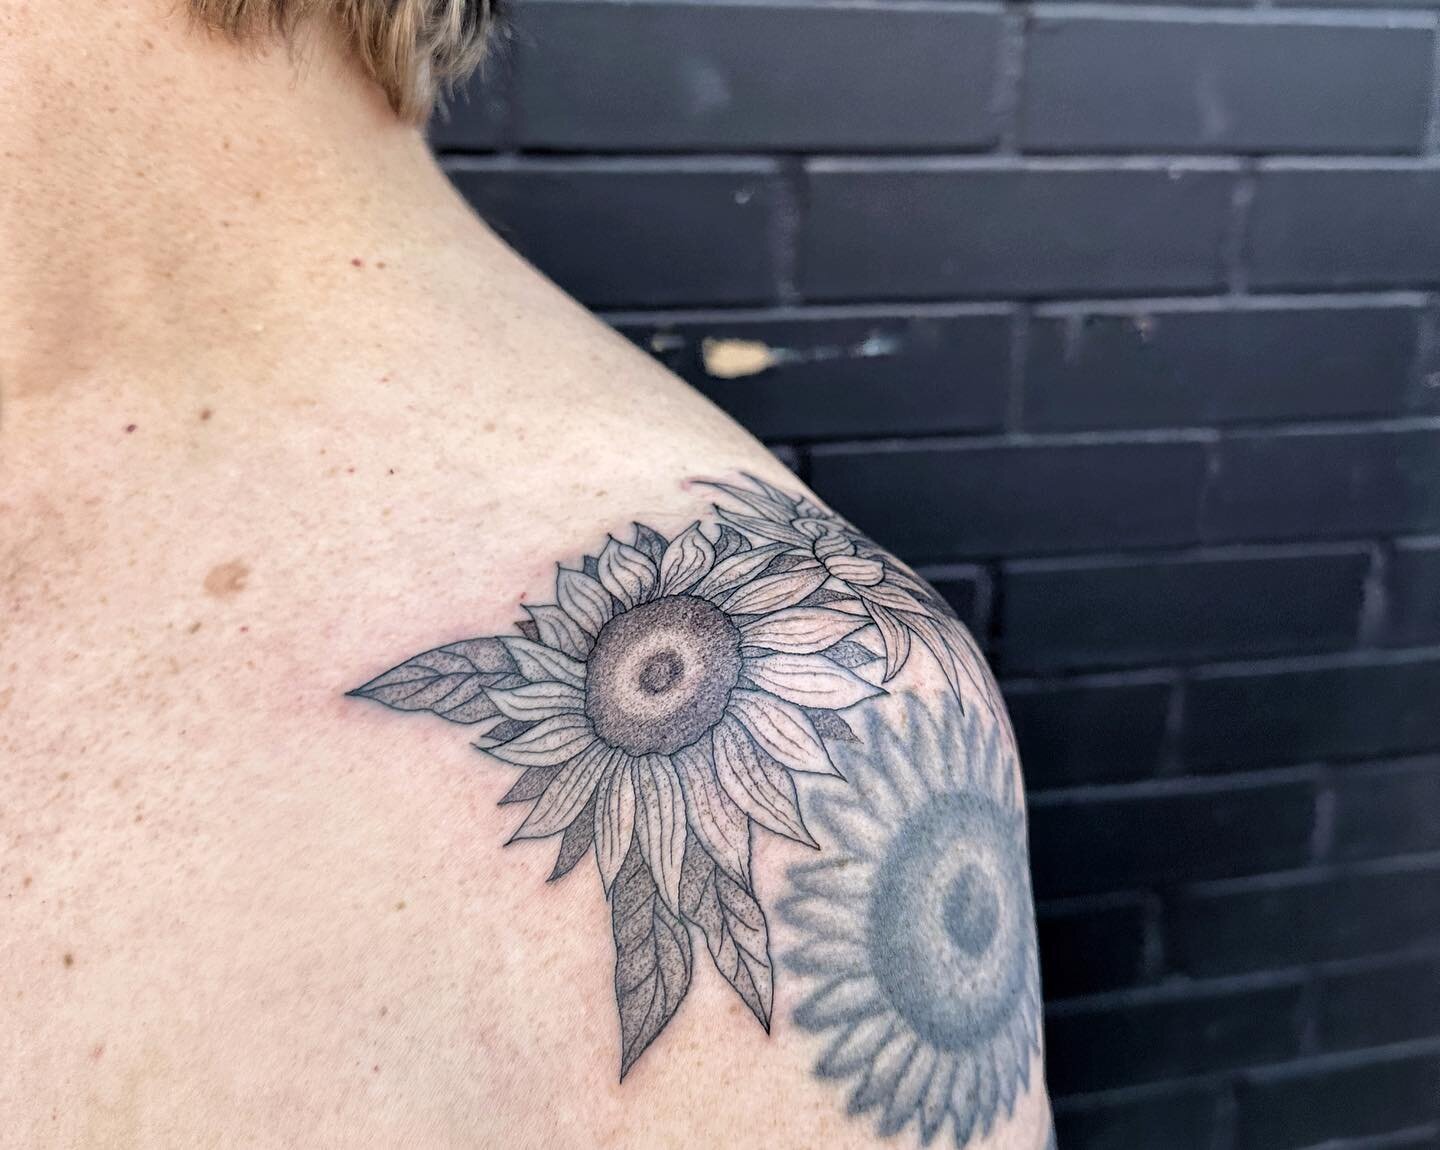 Sunflowers added on to my client&rsquo;s first tattoo 🌻 &ldquo;My first tattoo was when i was 30.  I am turning 50 this year.  This will be my last tattoo as i feel like my skin is getting thin.  Each tattoo has had special meaning.  This one i hope